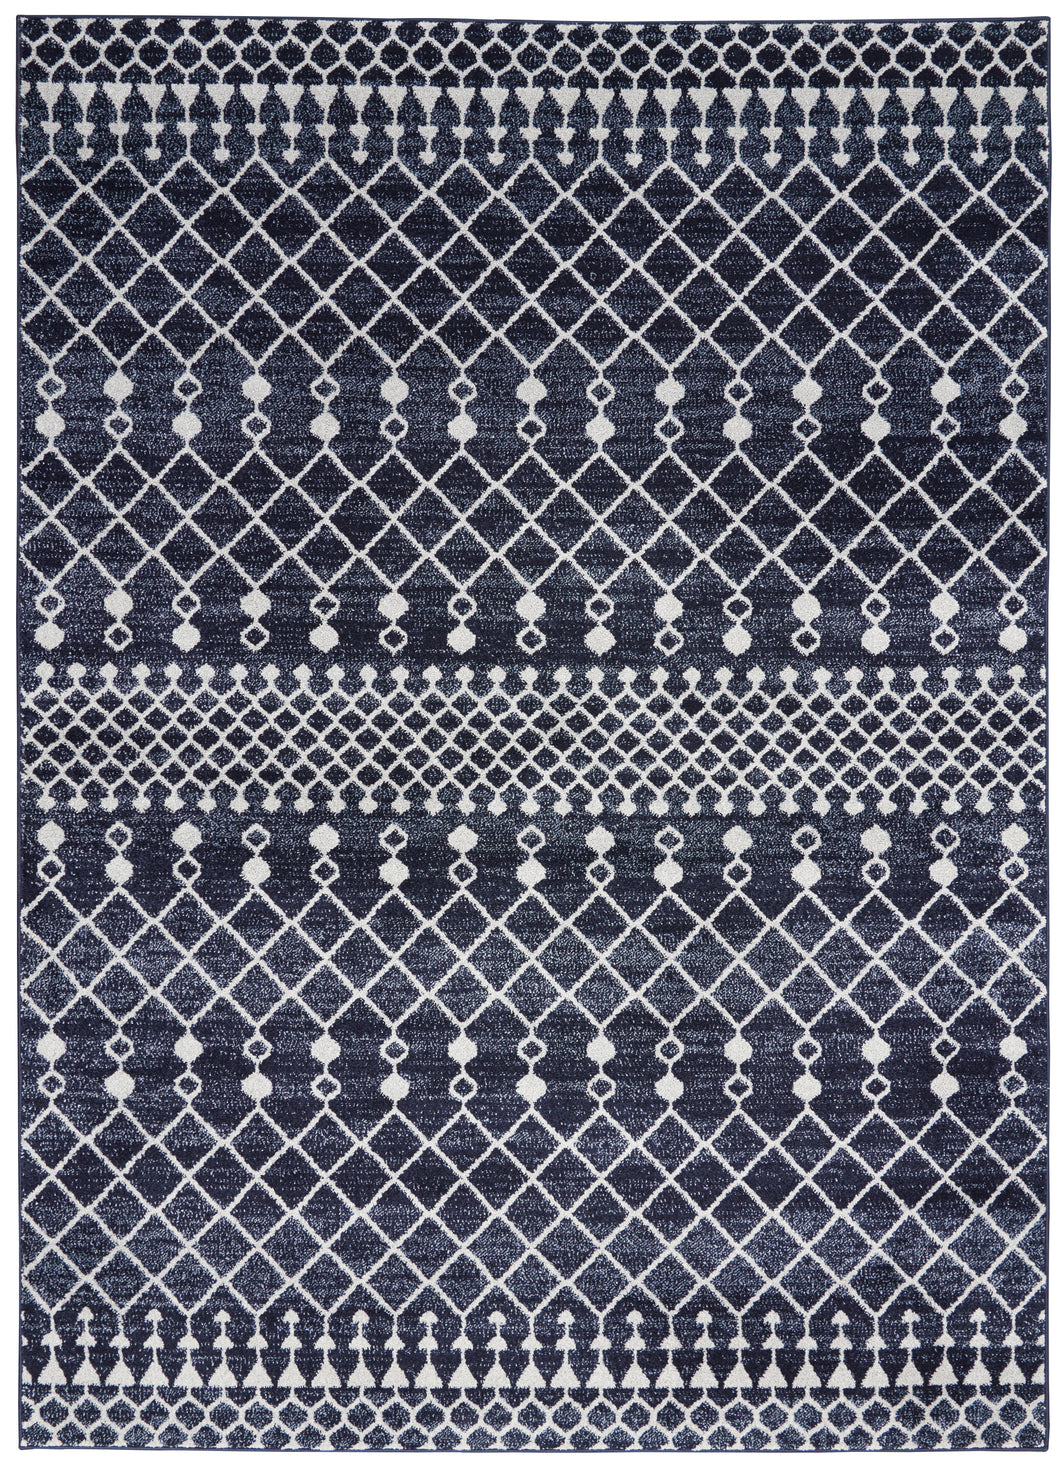 Nourison Palermo 3' x 5' Navy and Grey Distressed Bohemian Area Rug PMR03 Navy/Grey